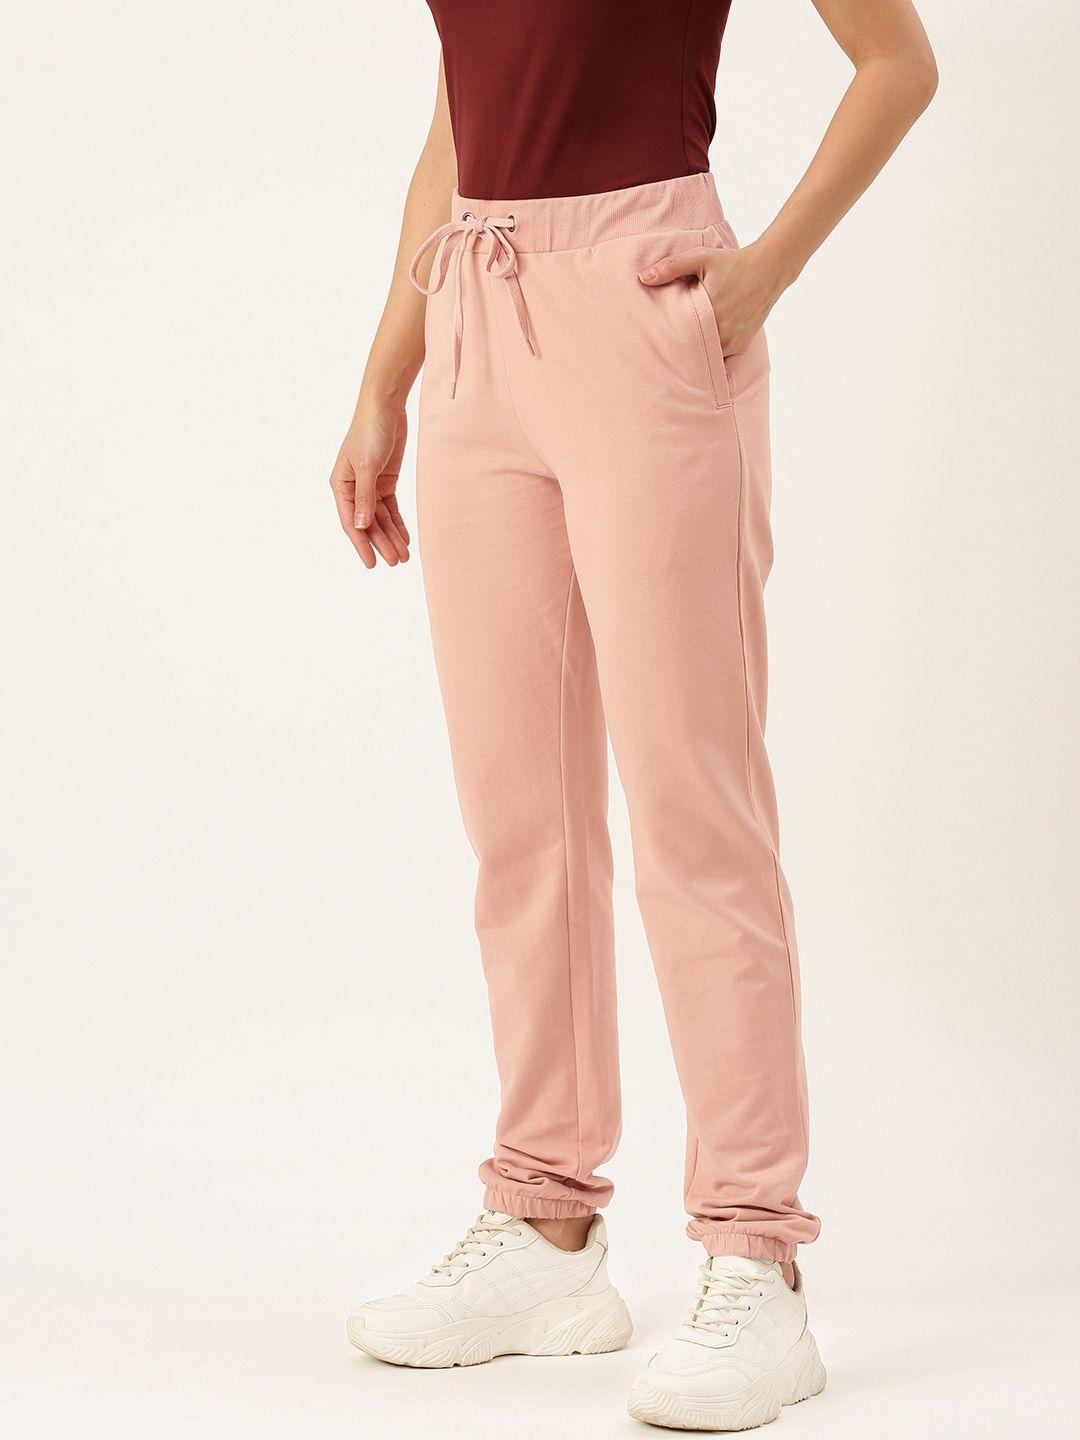 flying-machine-womens--pale-brown-solid-regular-joggers-track-pant